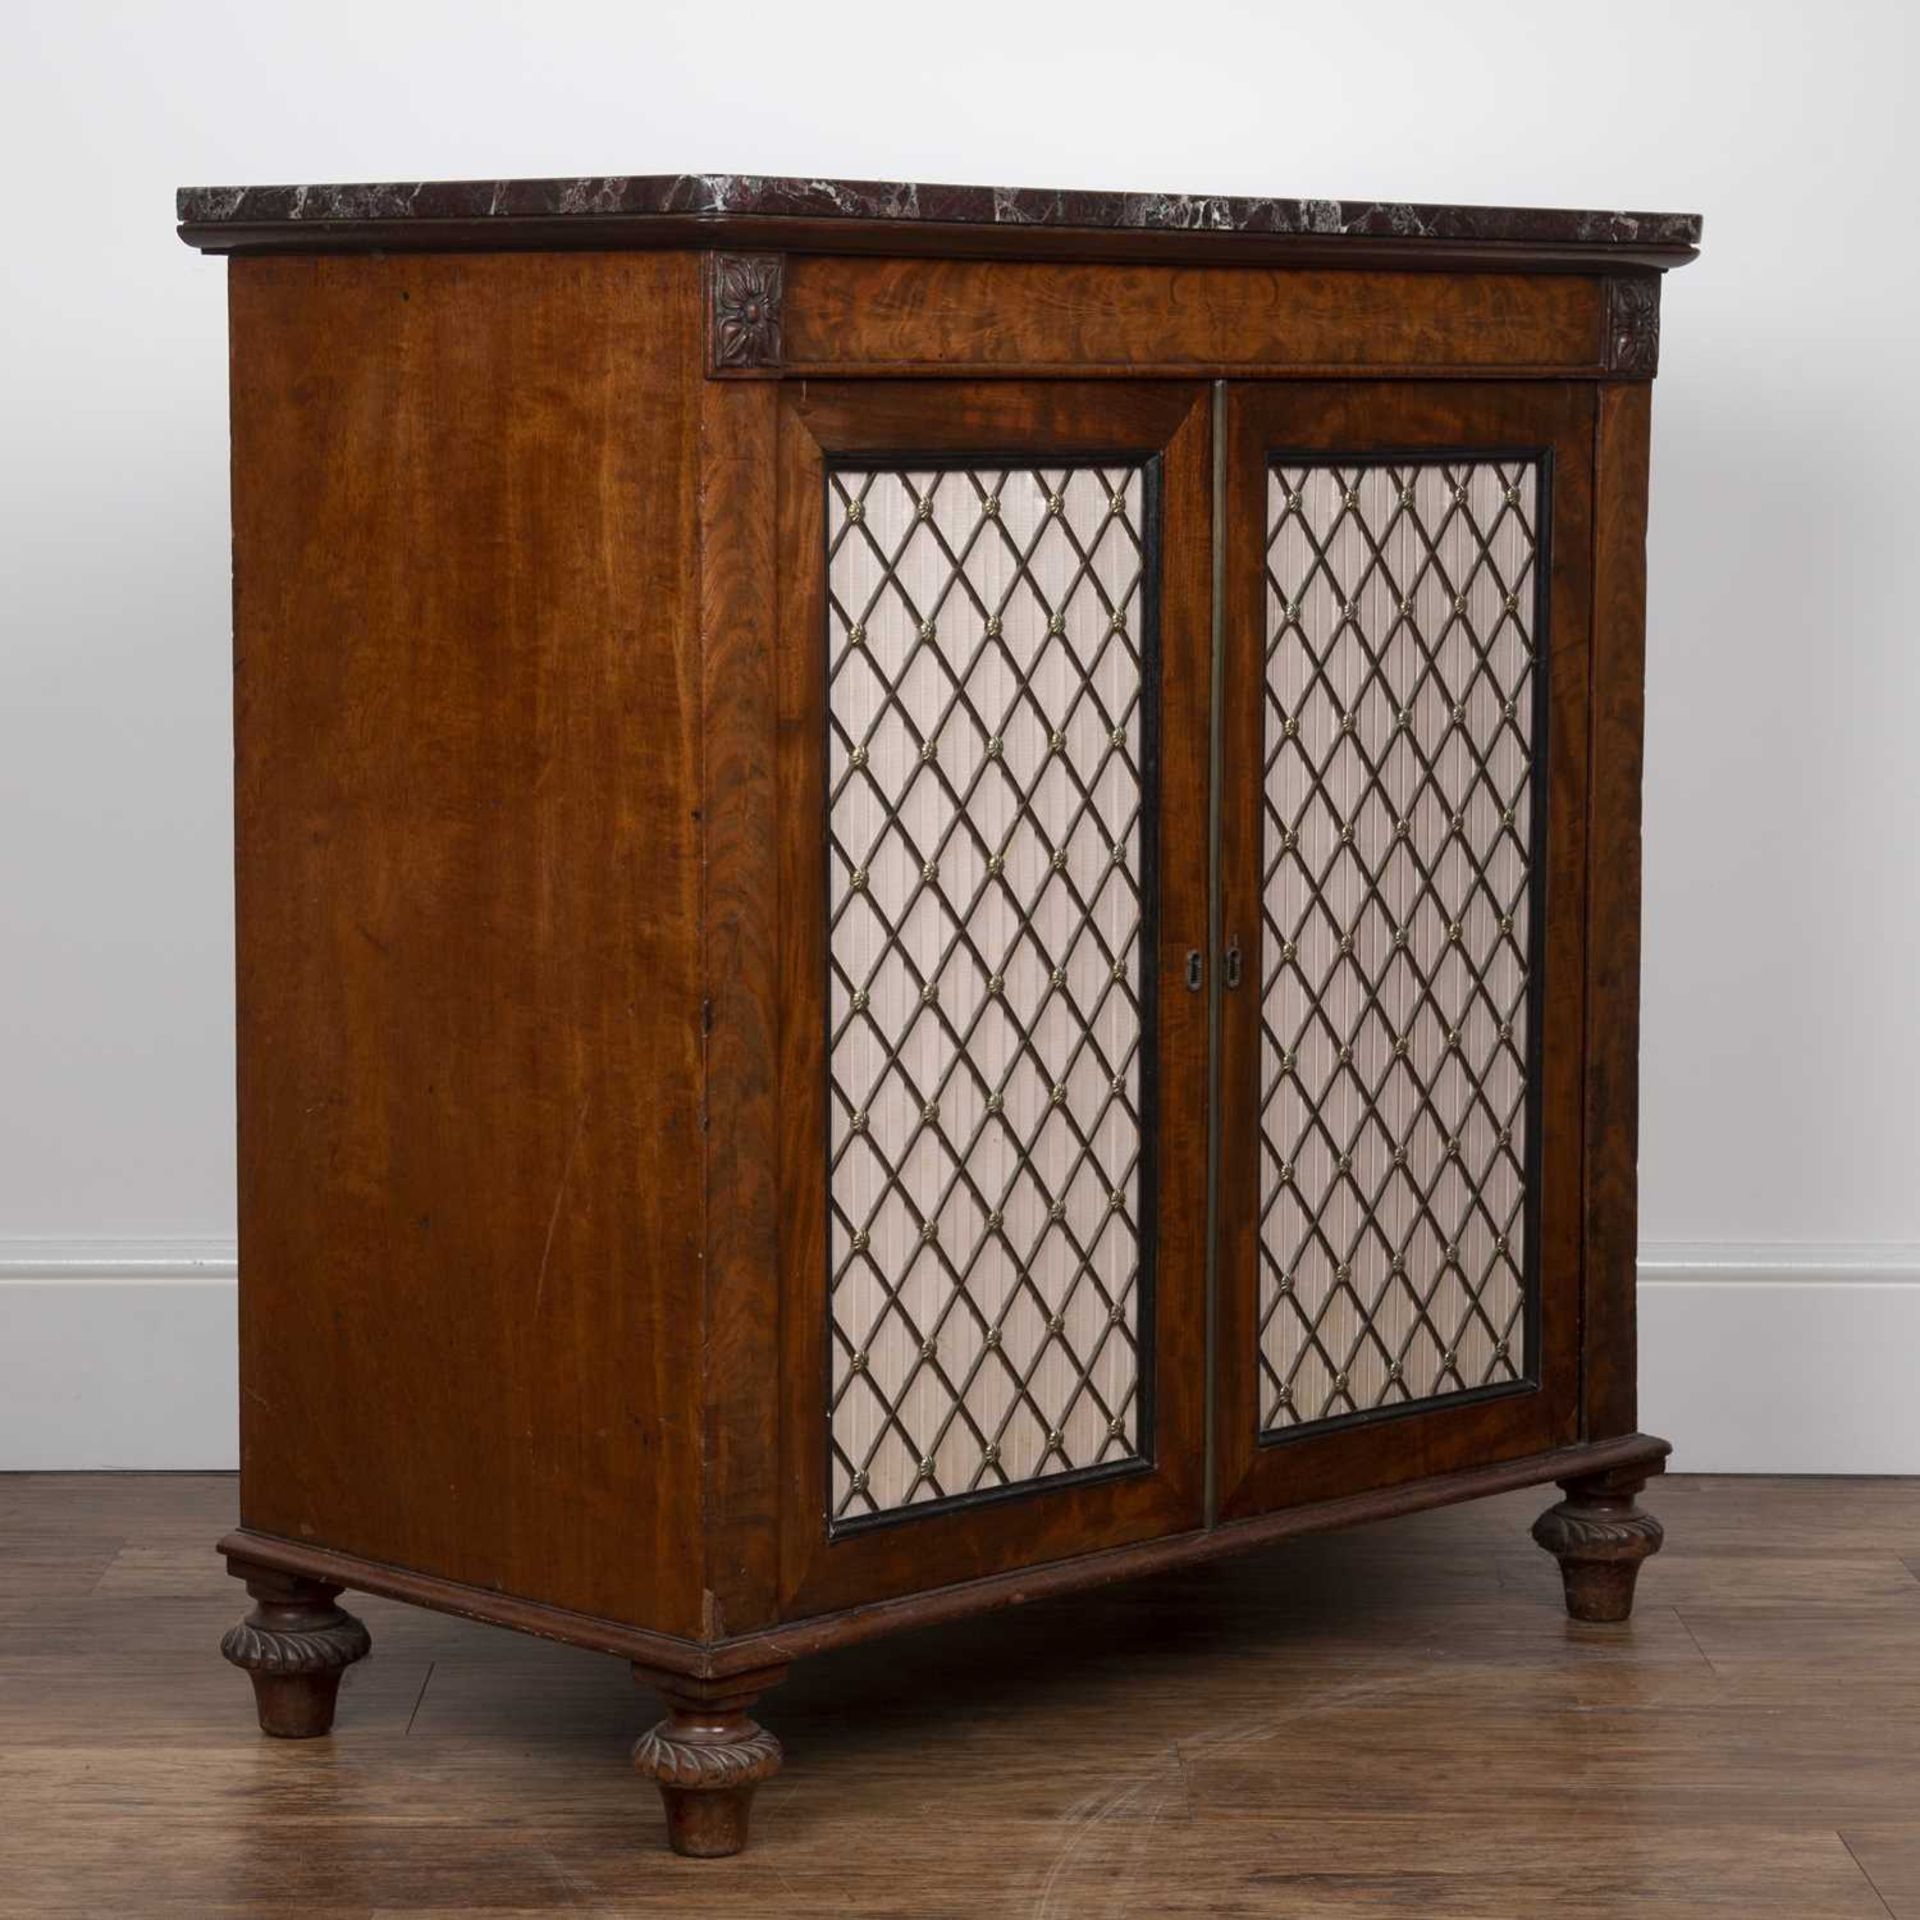 Mahogany and marble top side cabinet 19th Century, with enclosed brass grille doors and carved - Image 3 of 6